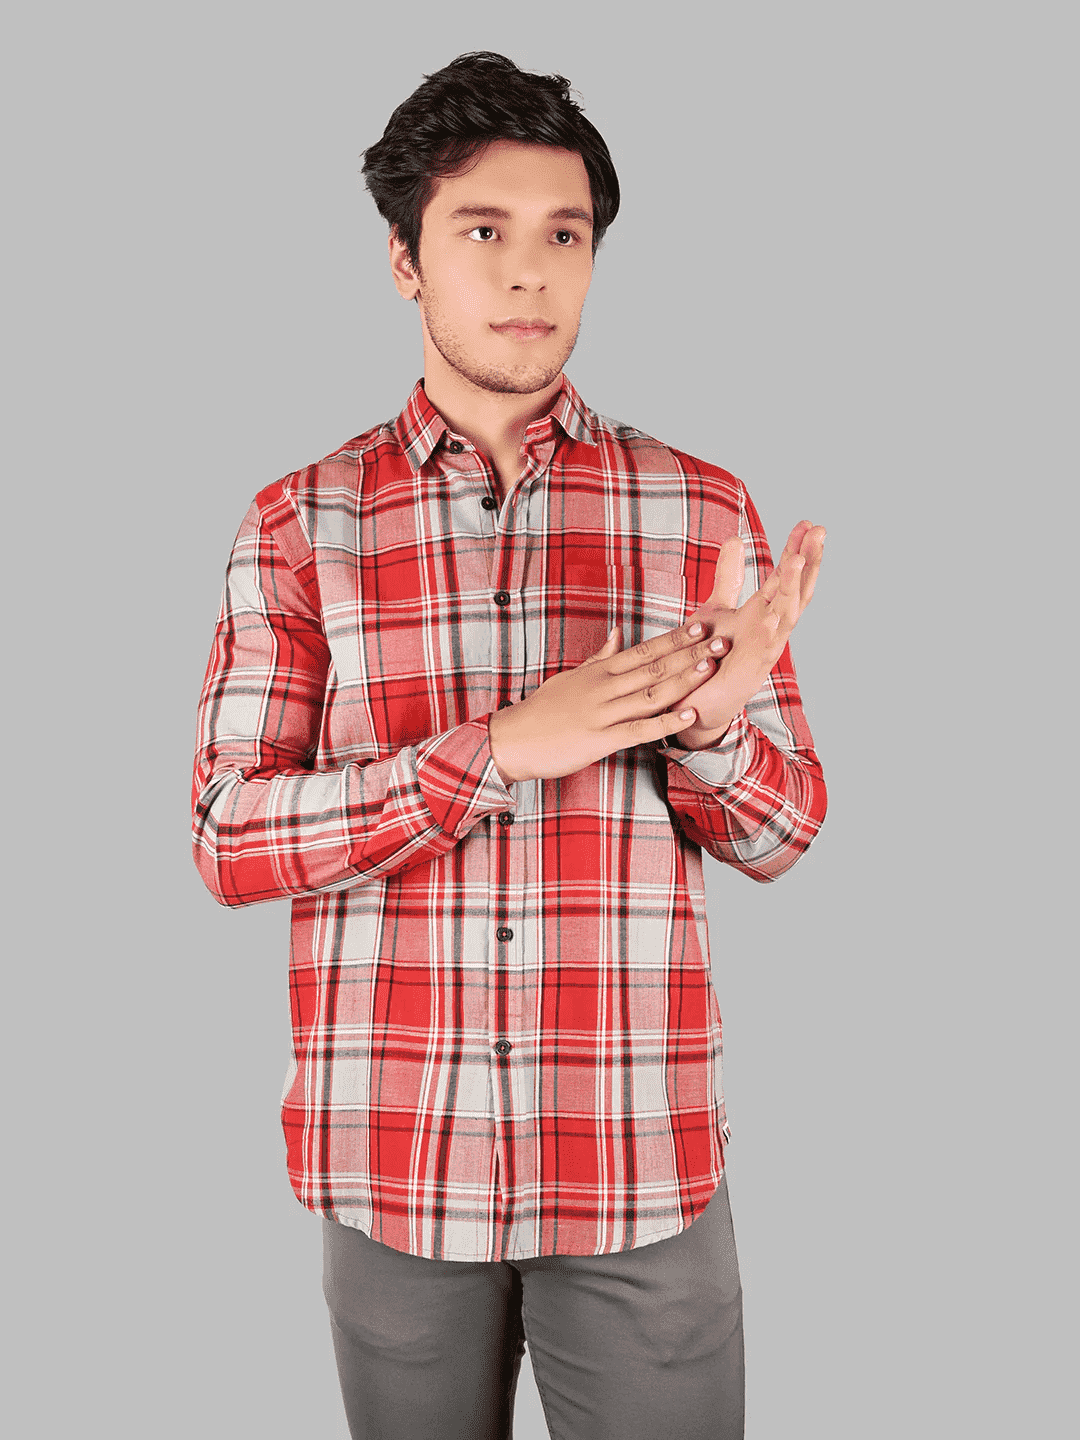 Shop Best Quality Mens Shirt Online in India - Ahmedabad Clothing